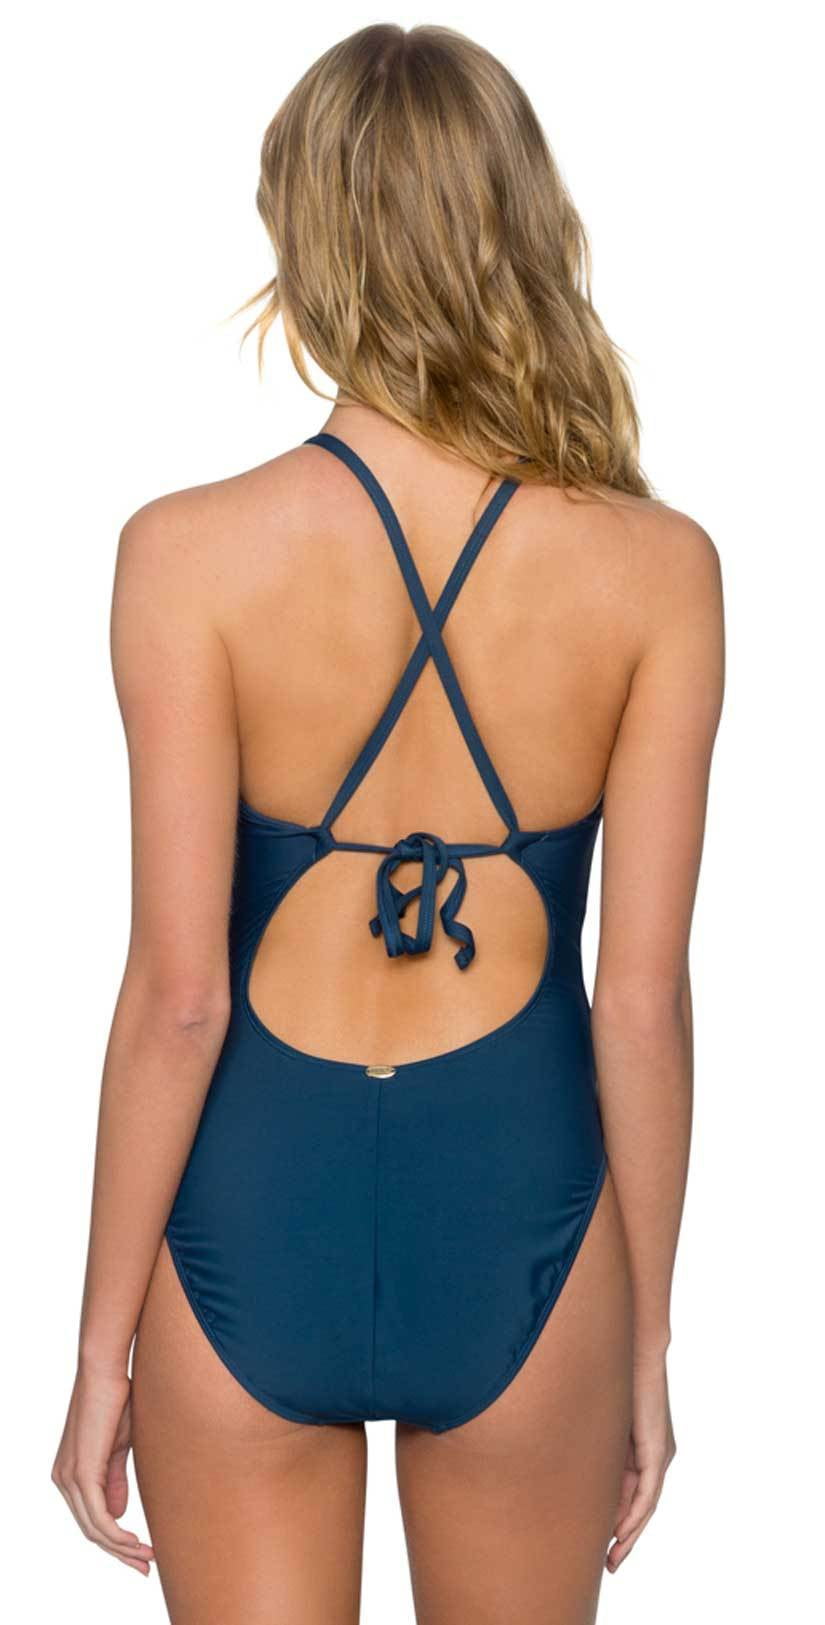 Sunsets Veronica One-Piece & Reviews